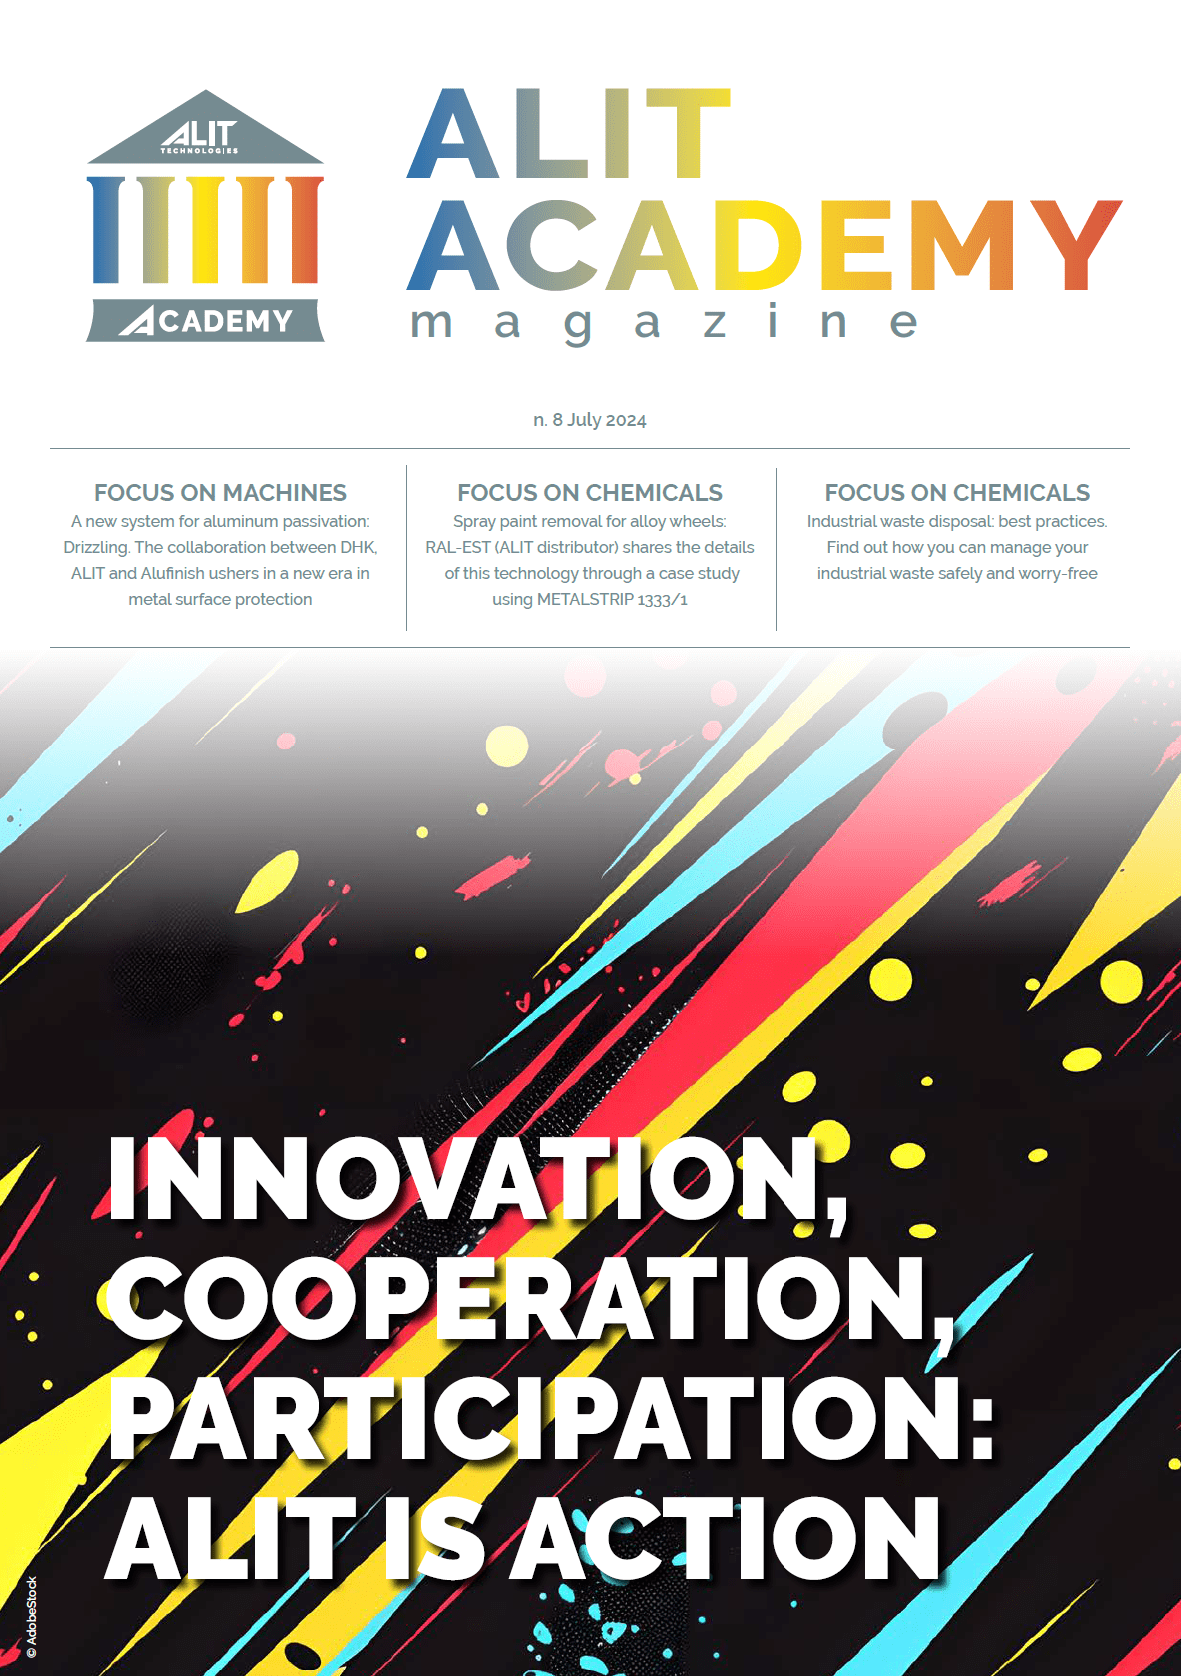 INNOVATION, COOPERATION, PARTICIPATION: ALIT is ACTION!